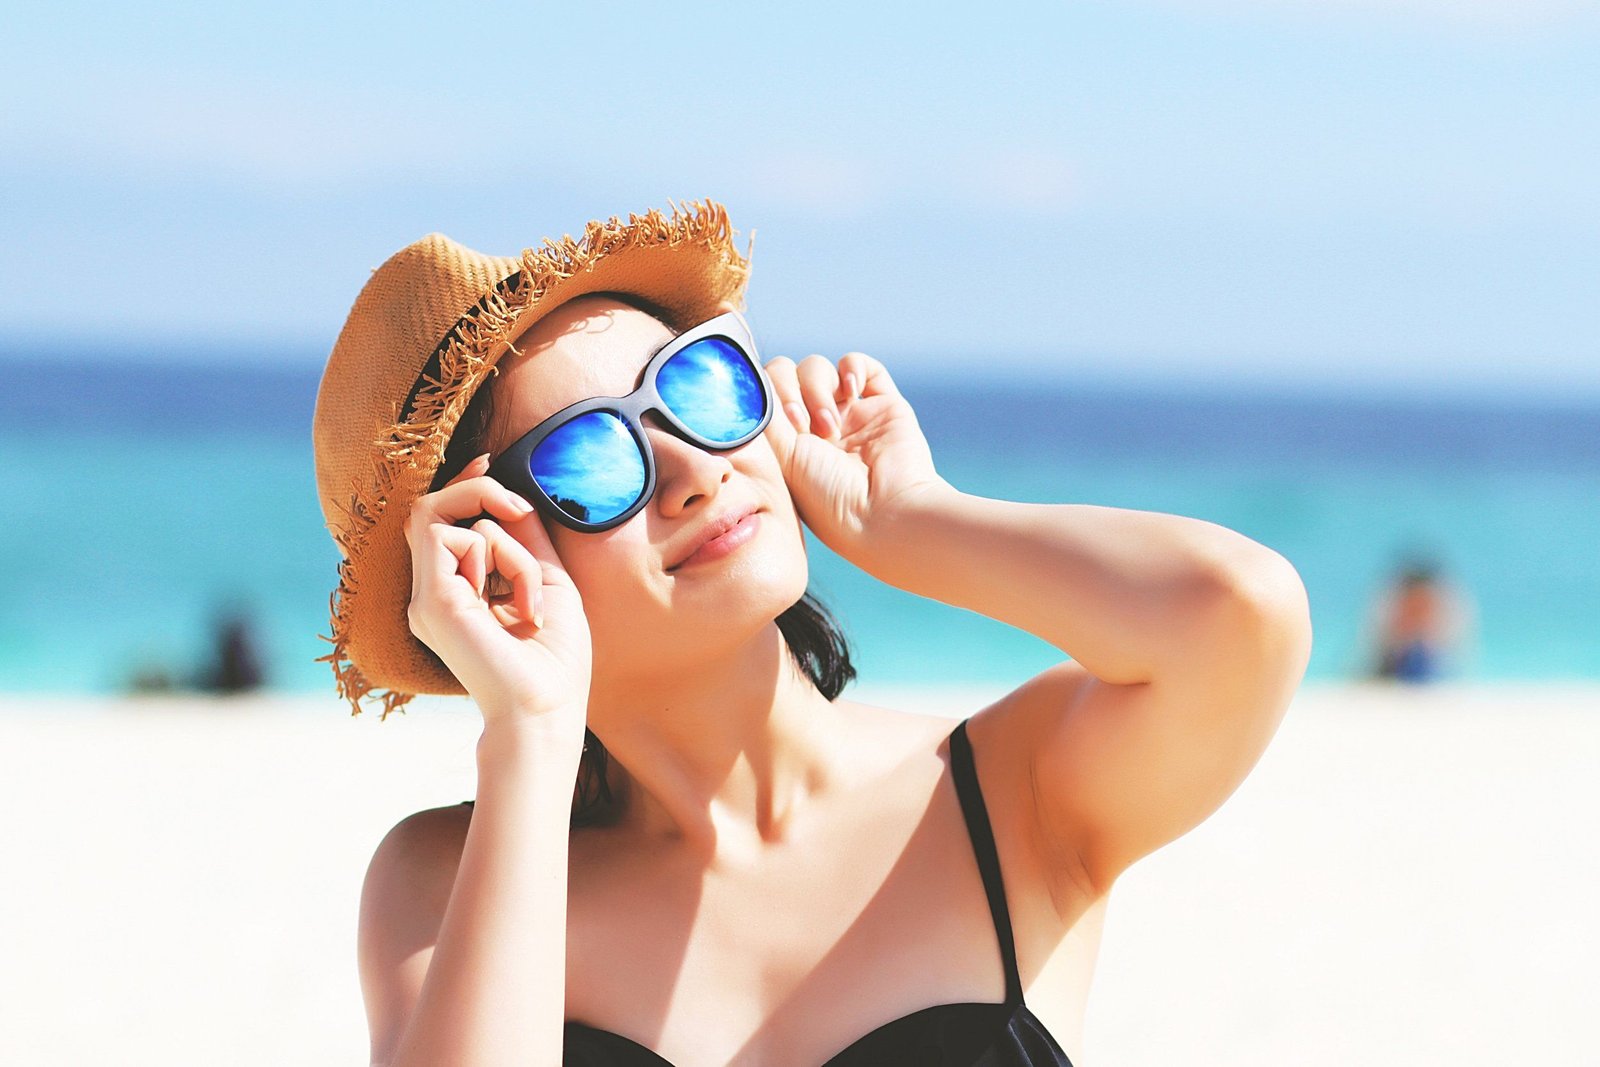 Shield Your Skin: 10 Essential Sun Protection Tips to Prevent Skin Cancer